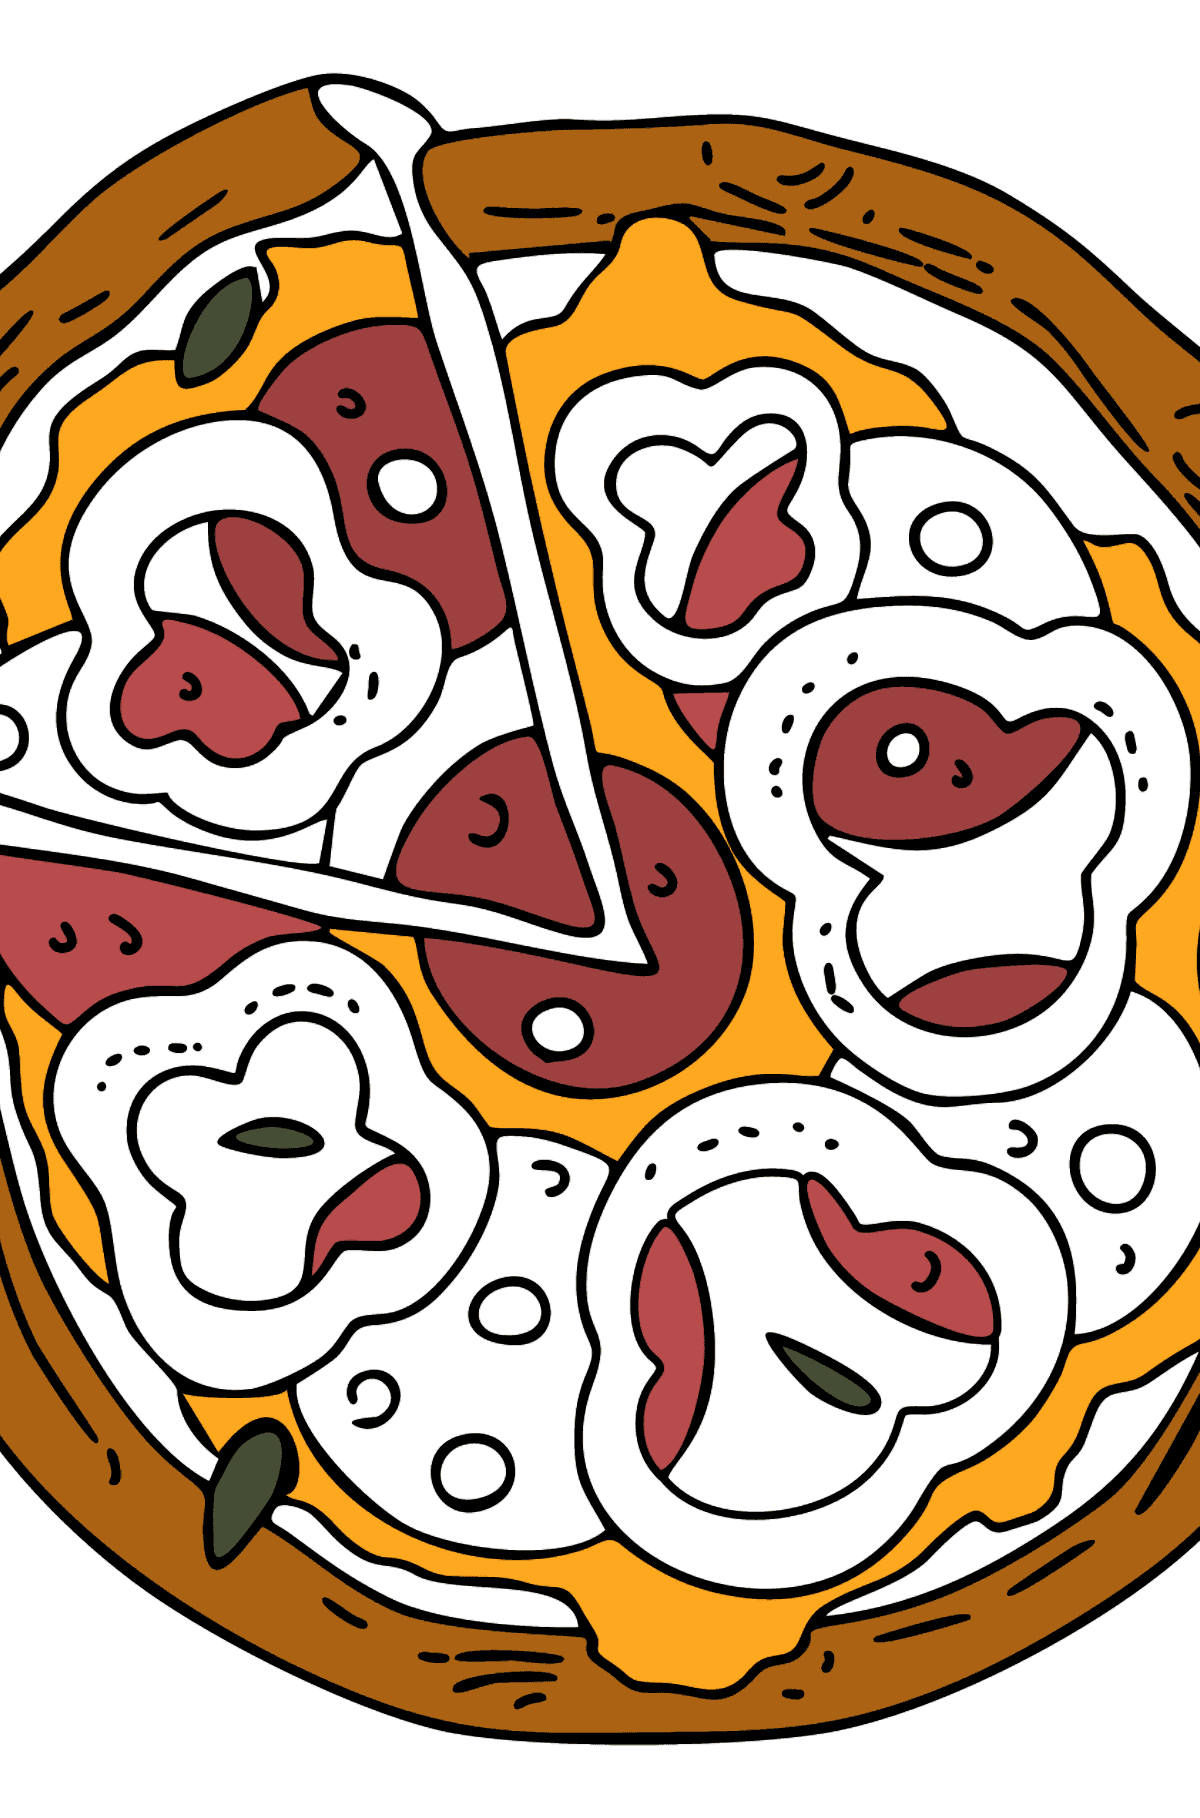 Tasty Pizza coloring page - Coloring Pages for Kids